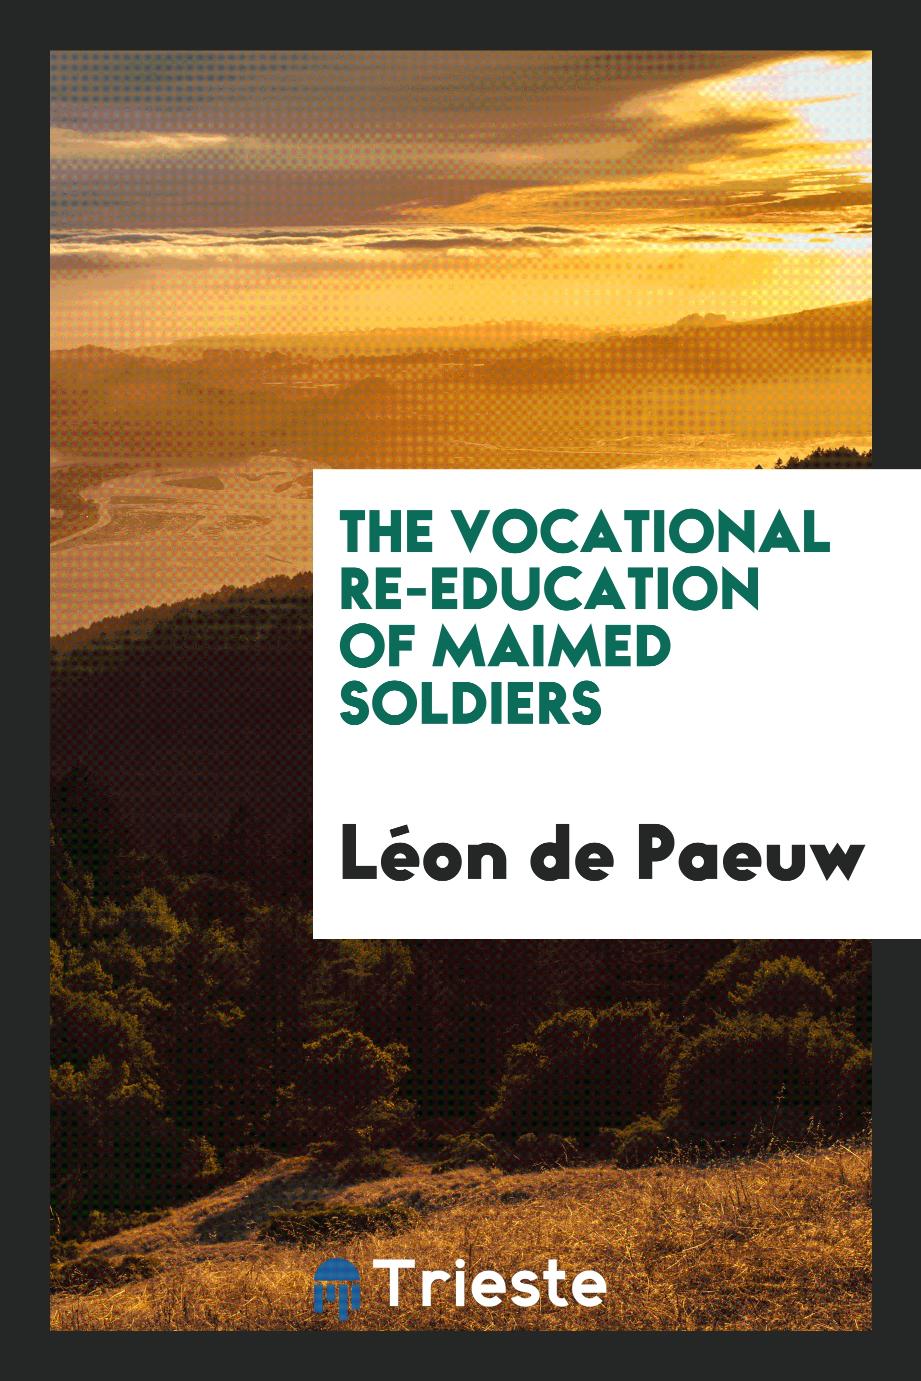 The vocational re-education of maimed soldiers